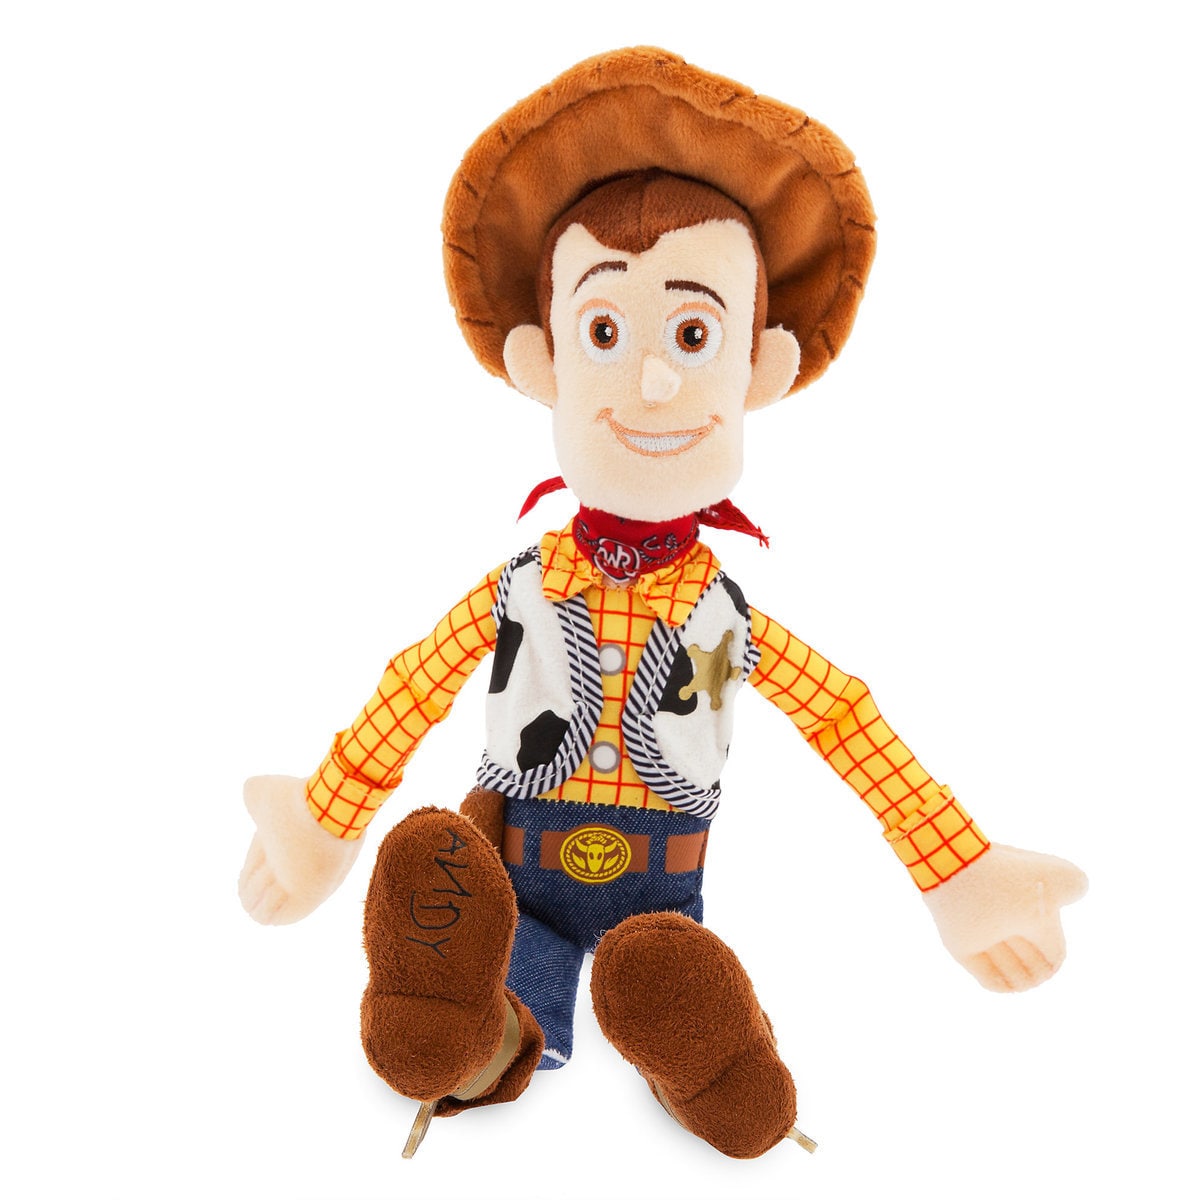 Disney Toy Story 4 Woody Mini Bean Bag Plush New with Tags